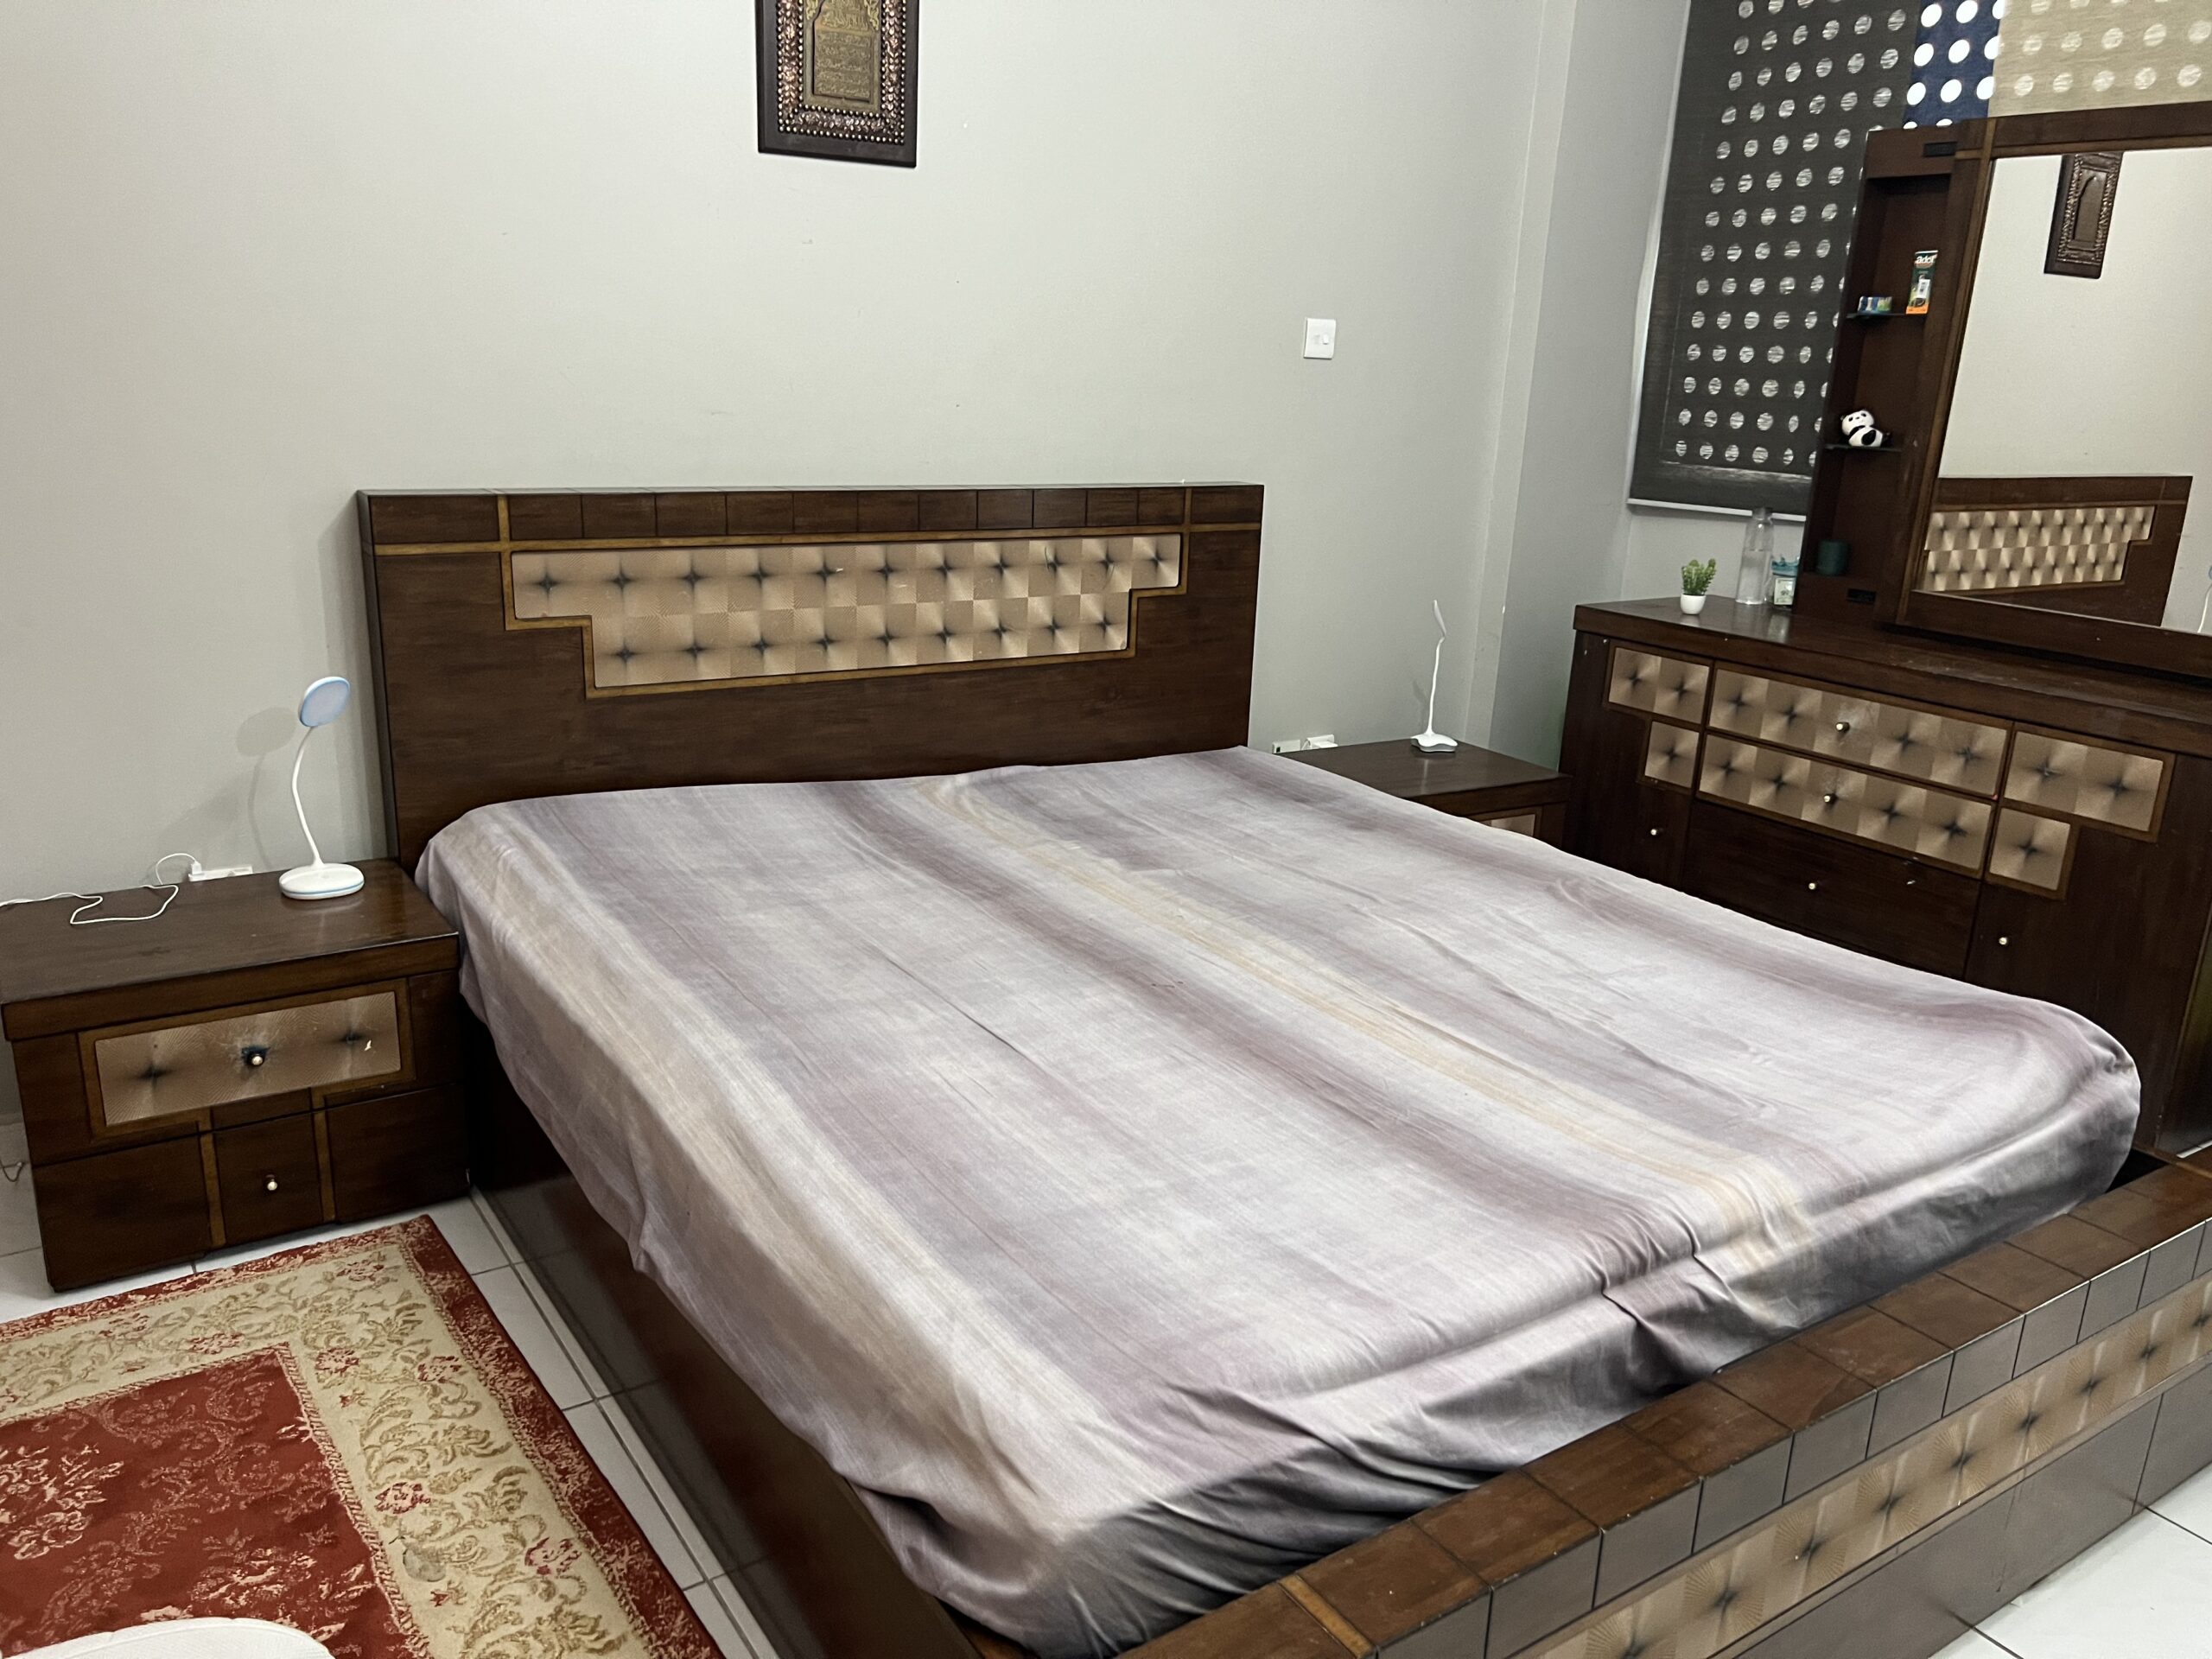 Bed Set King size, Mattress, Side- Tables, Dressing Mirror, Stool